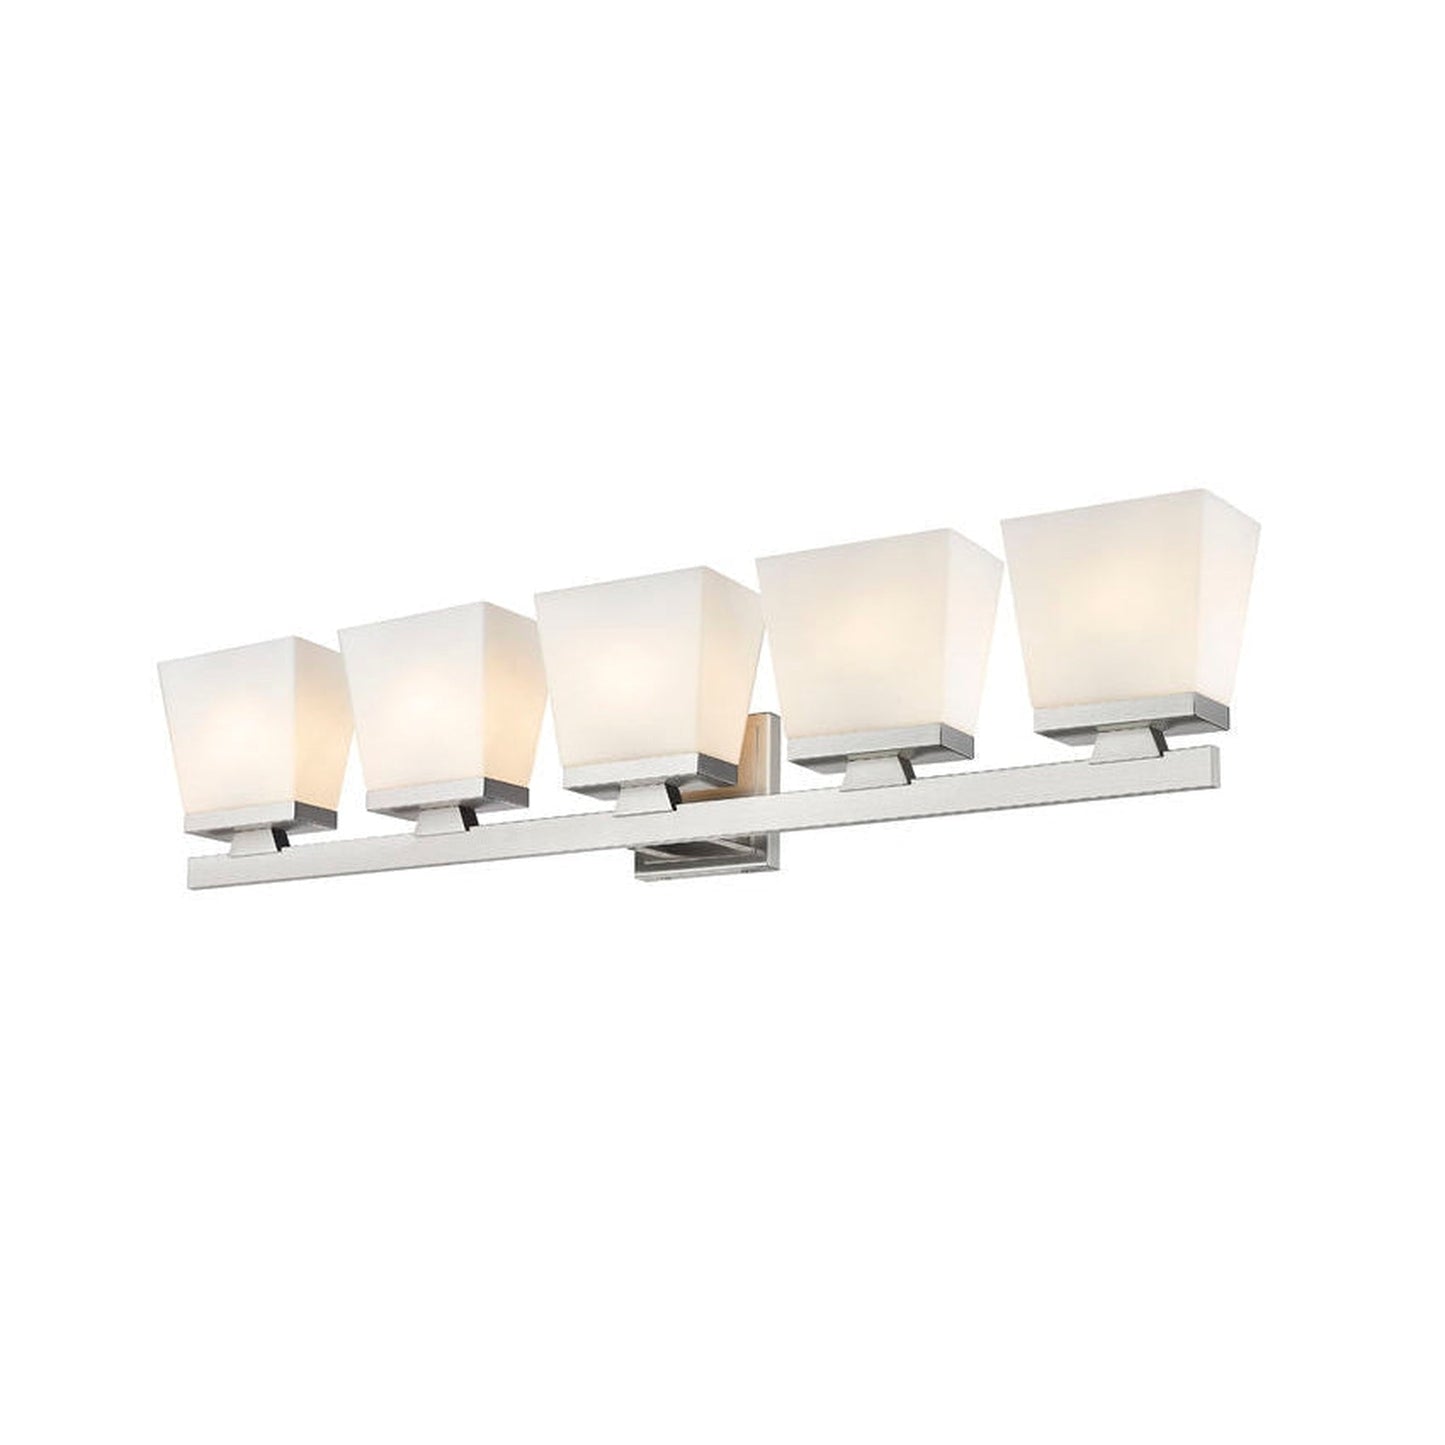 Z-Lite Astor 36" 5-Light Brushed Nickel Vanity Light With Etched Opal Glass Shade